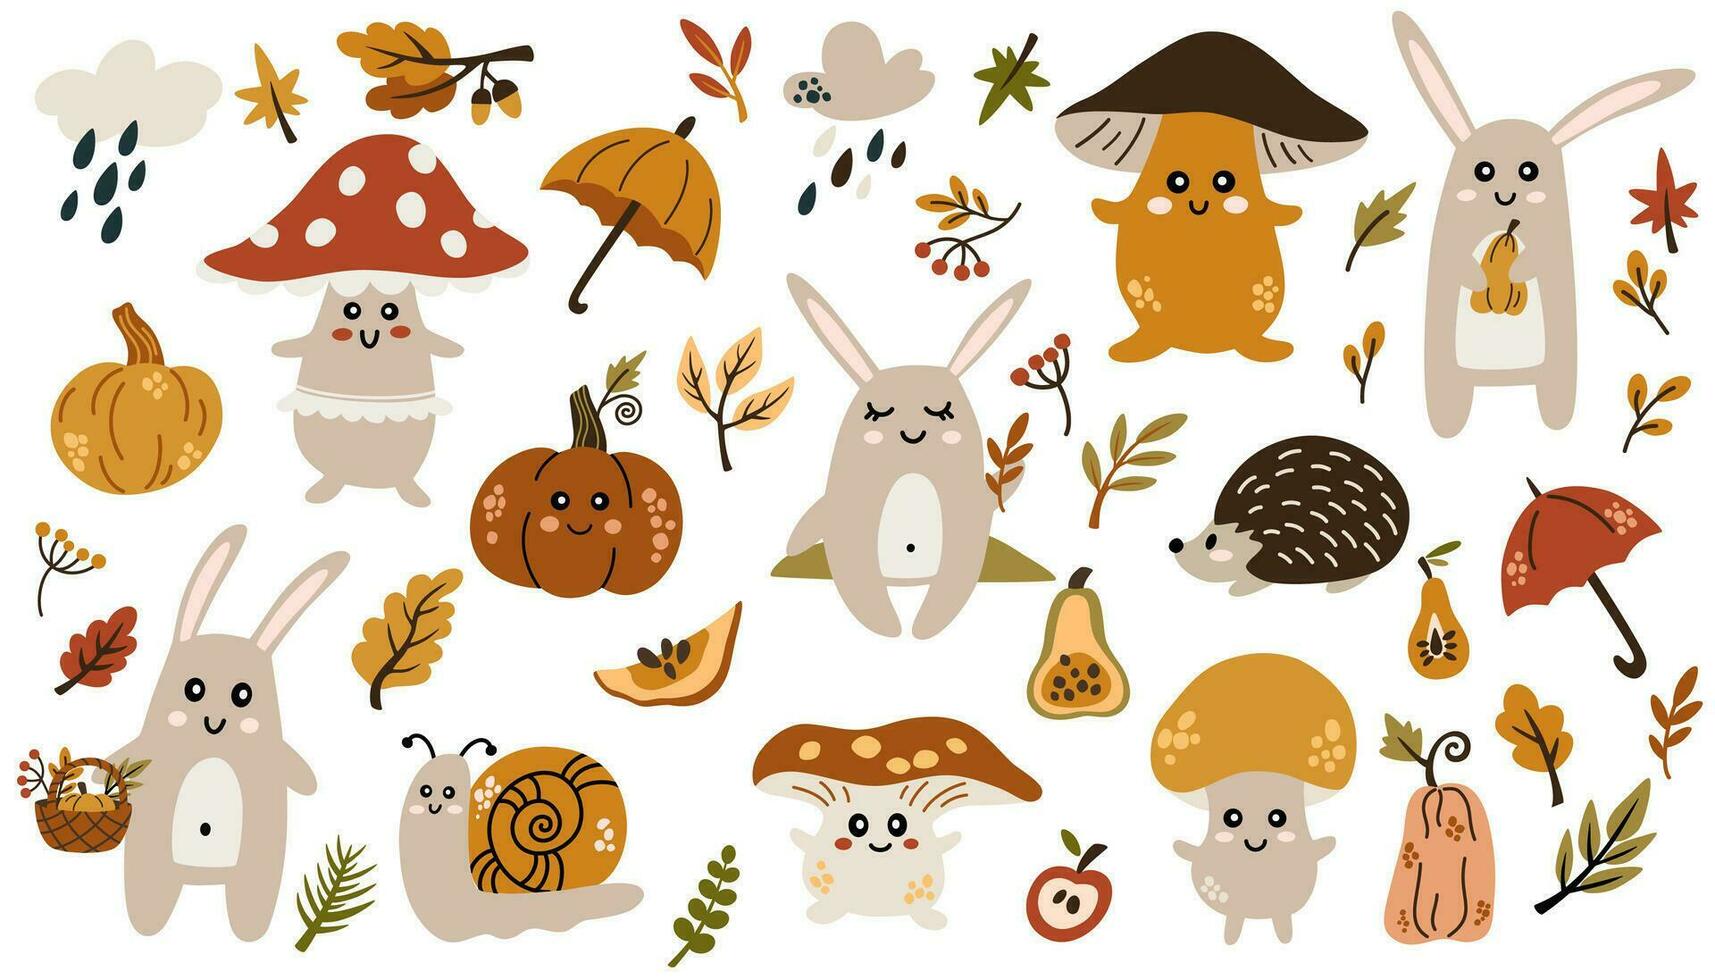 Autumn set, mushrooms characters, rabbits, hedgehog, snail, clouds, pumpkins and various leaves and berries. Scrapbook collection of fall season elements. Harvest time. Vector Illustration